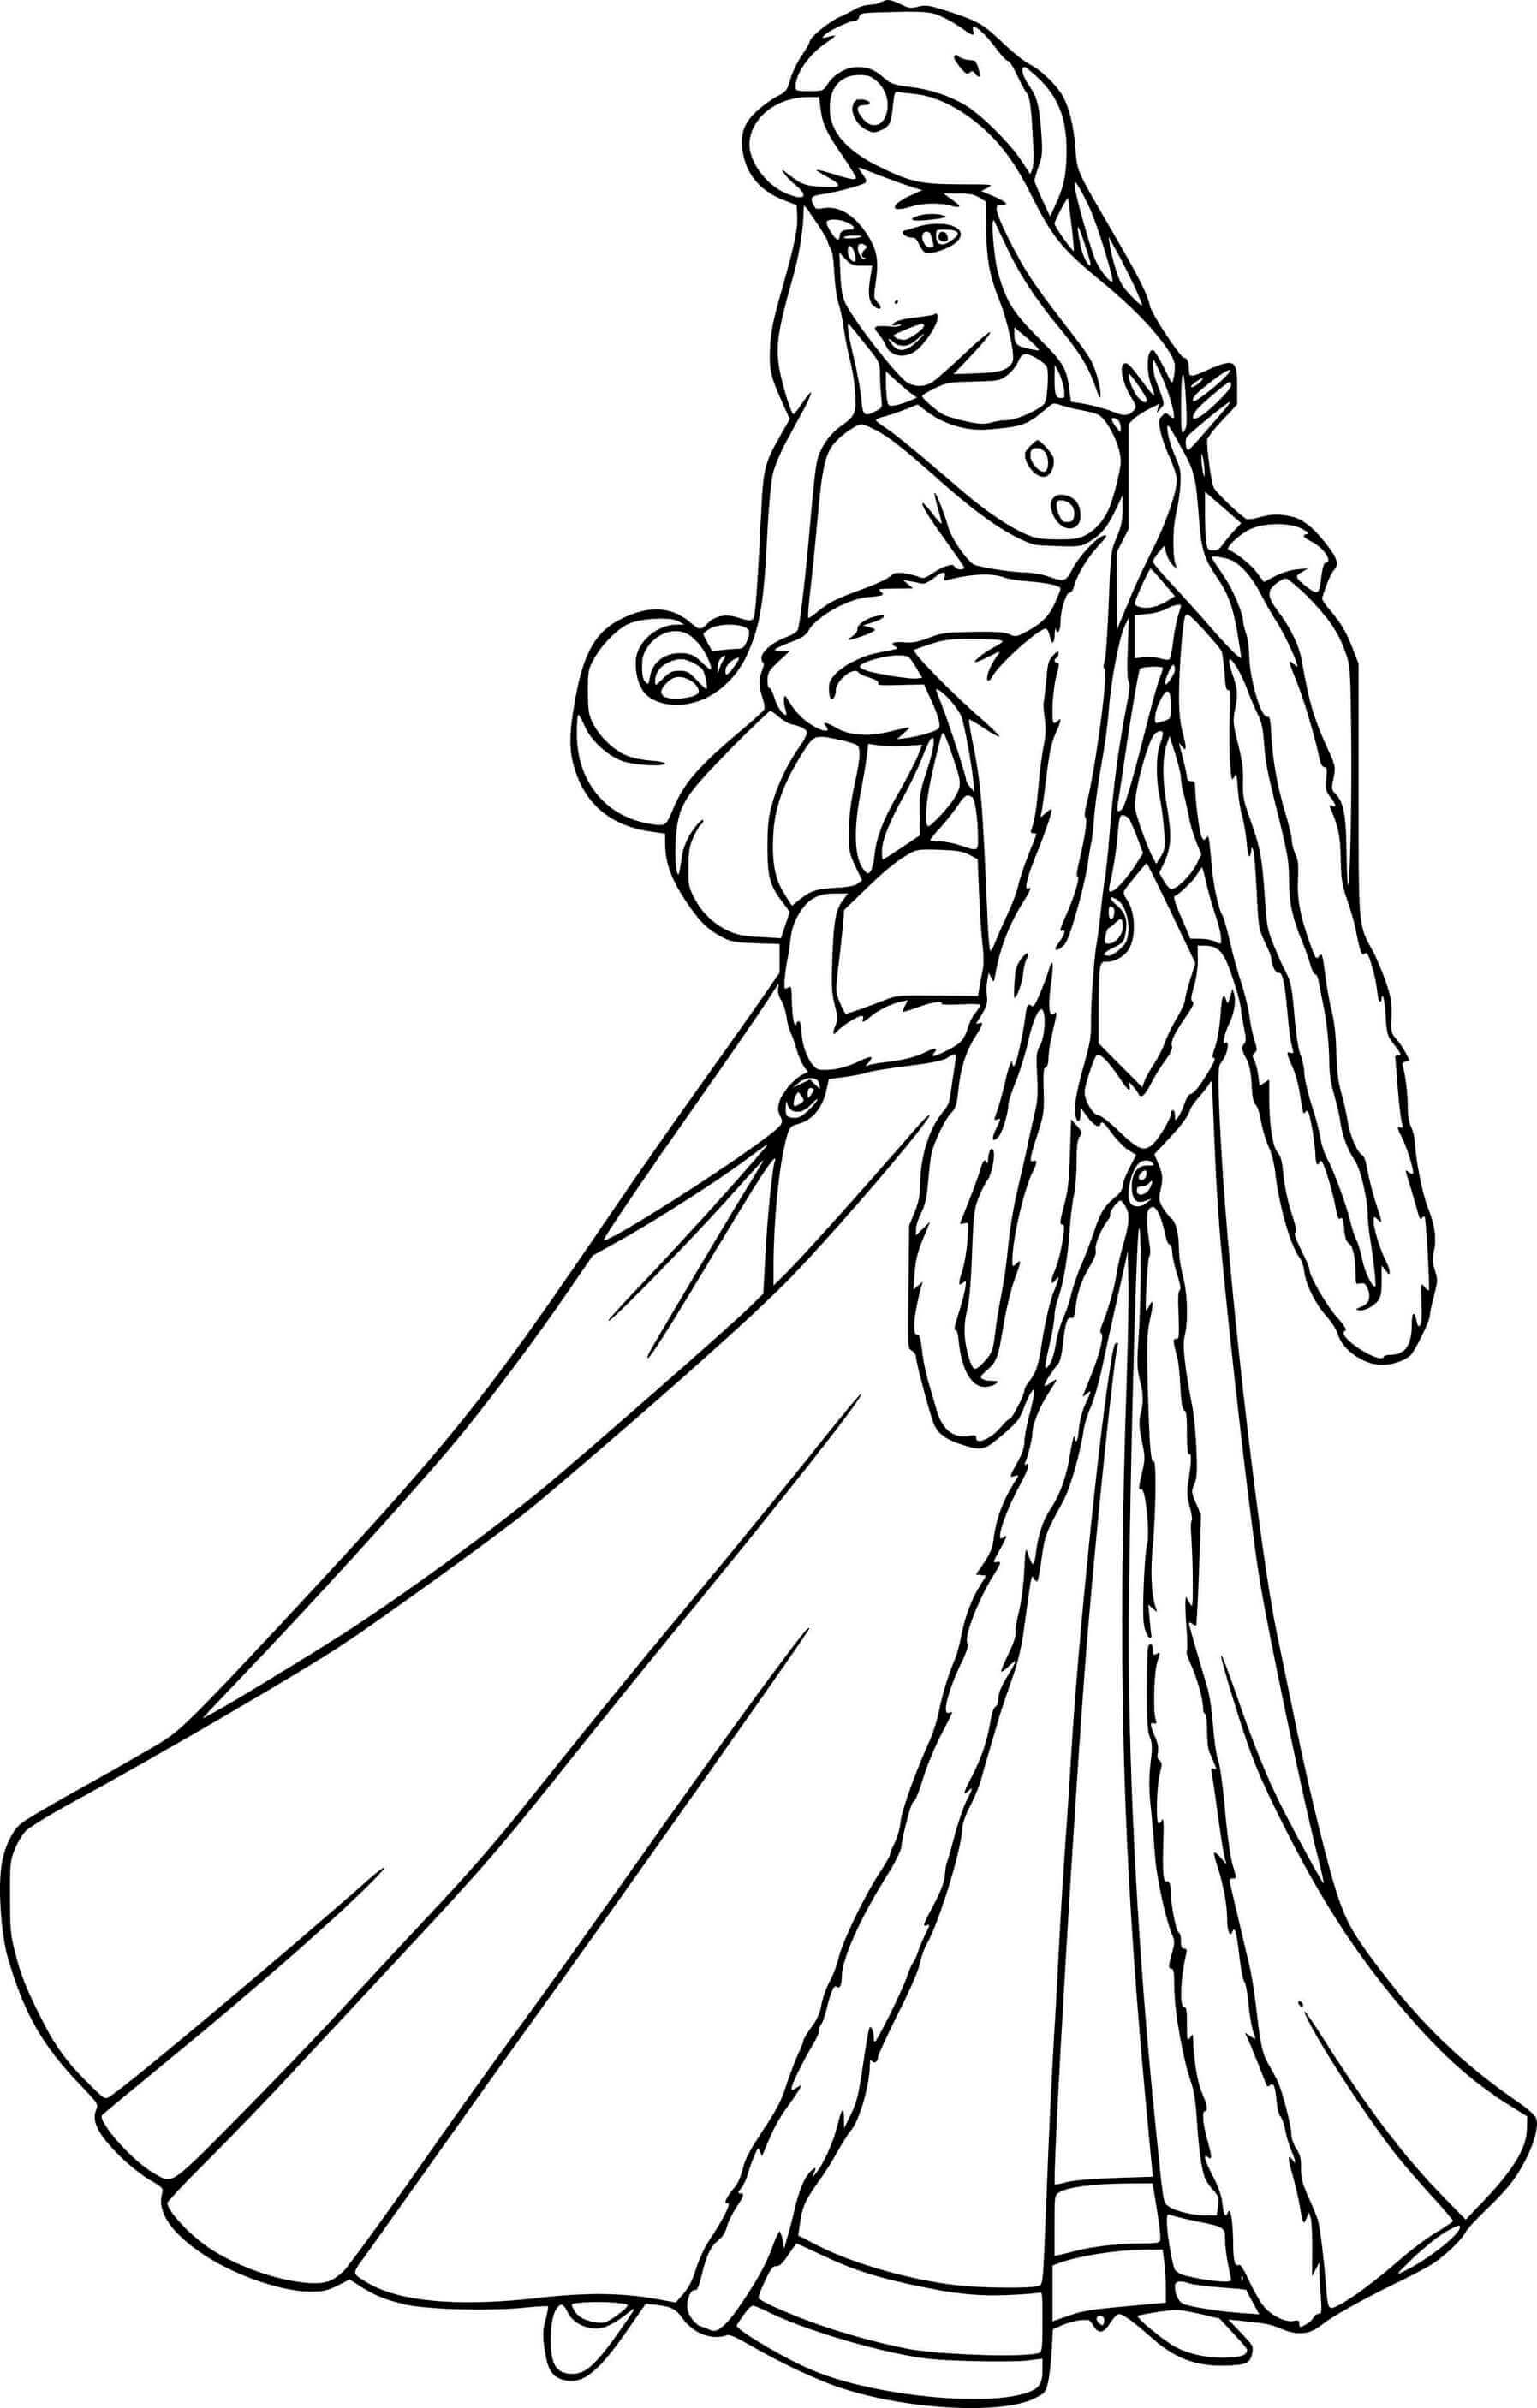 Aurora In Winter Dress Disney Princess Coloring Pages   Coloring Cool